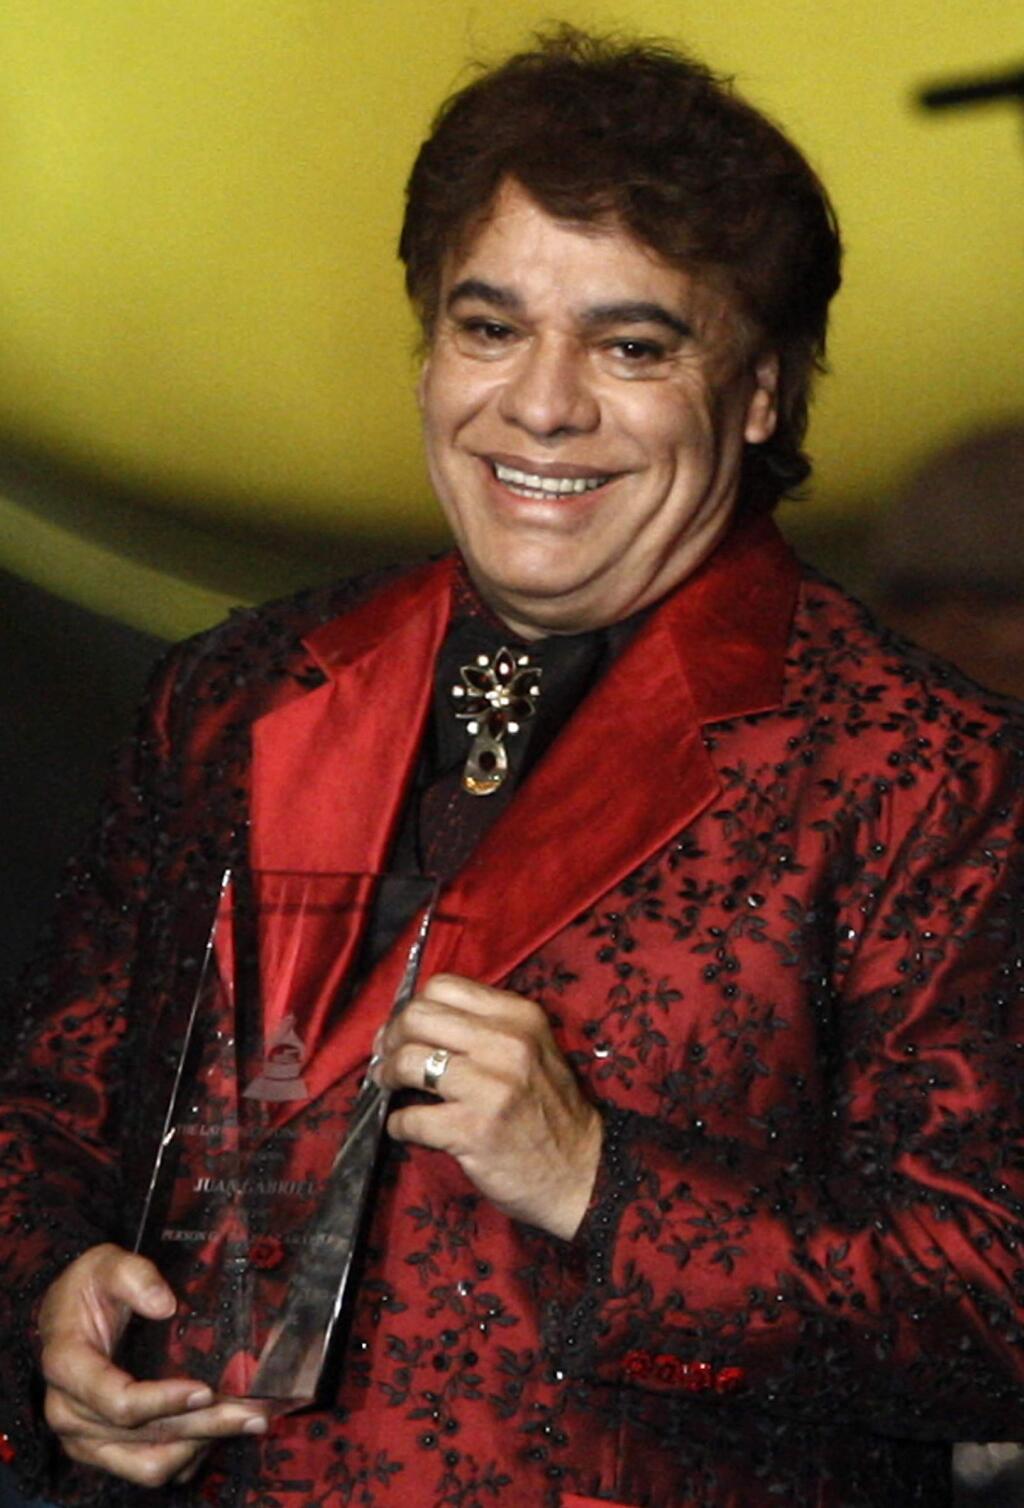 FILE - In this Nov. 4, 2009, file photo, Juan Gabriel holds the Latin Recording Academy Person of The Year award in Las Vegas. Representatives of Juan Gabriel have reported Sunday, Aug. 28, 2016, that he has died. Juan Gabriel was Mexico's leading singer-songwriter and top-selling artist with sales of more than 100 million albums. The statement says he died Sunday, but did not say where. (AP Photo/Matt Sayles, File)